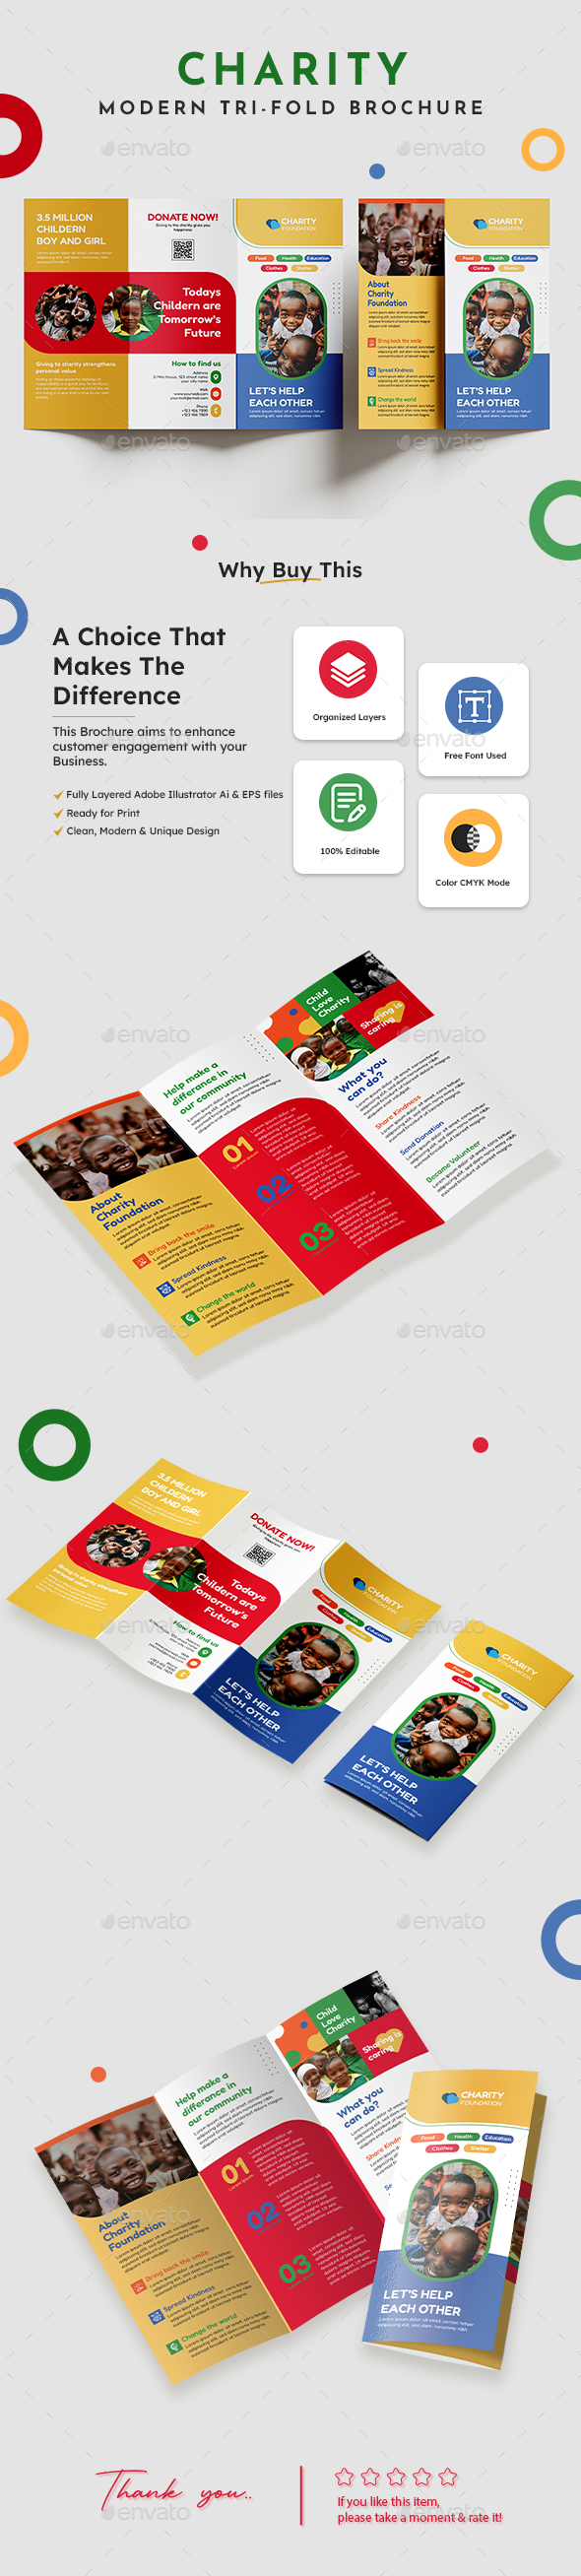 [DOWNLOAD]Charity Trifold Brochure